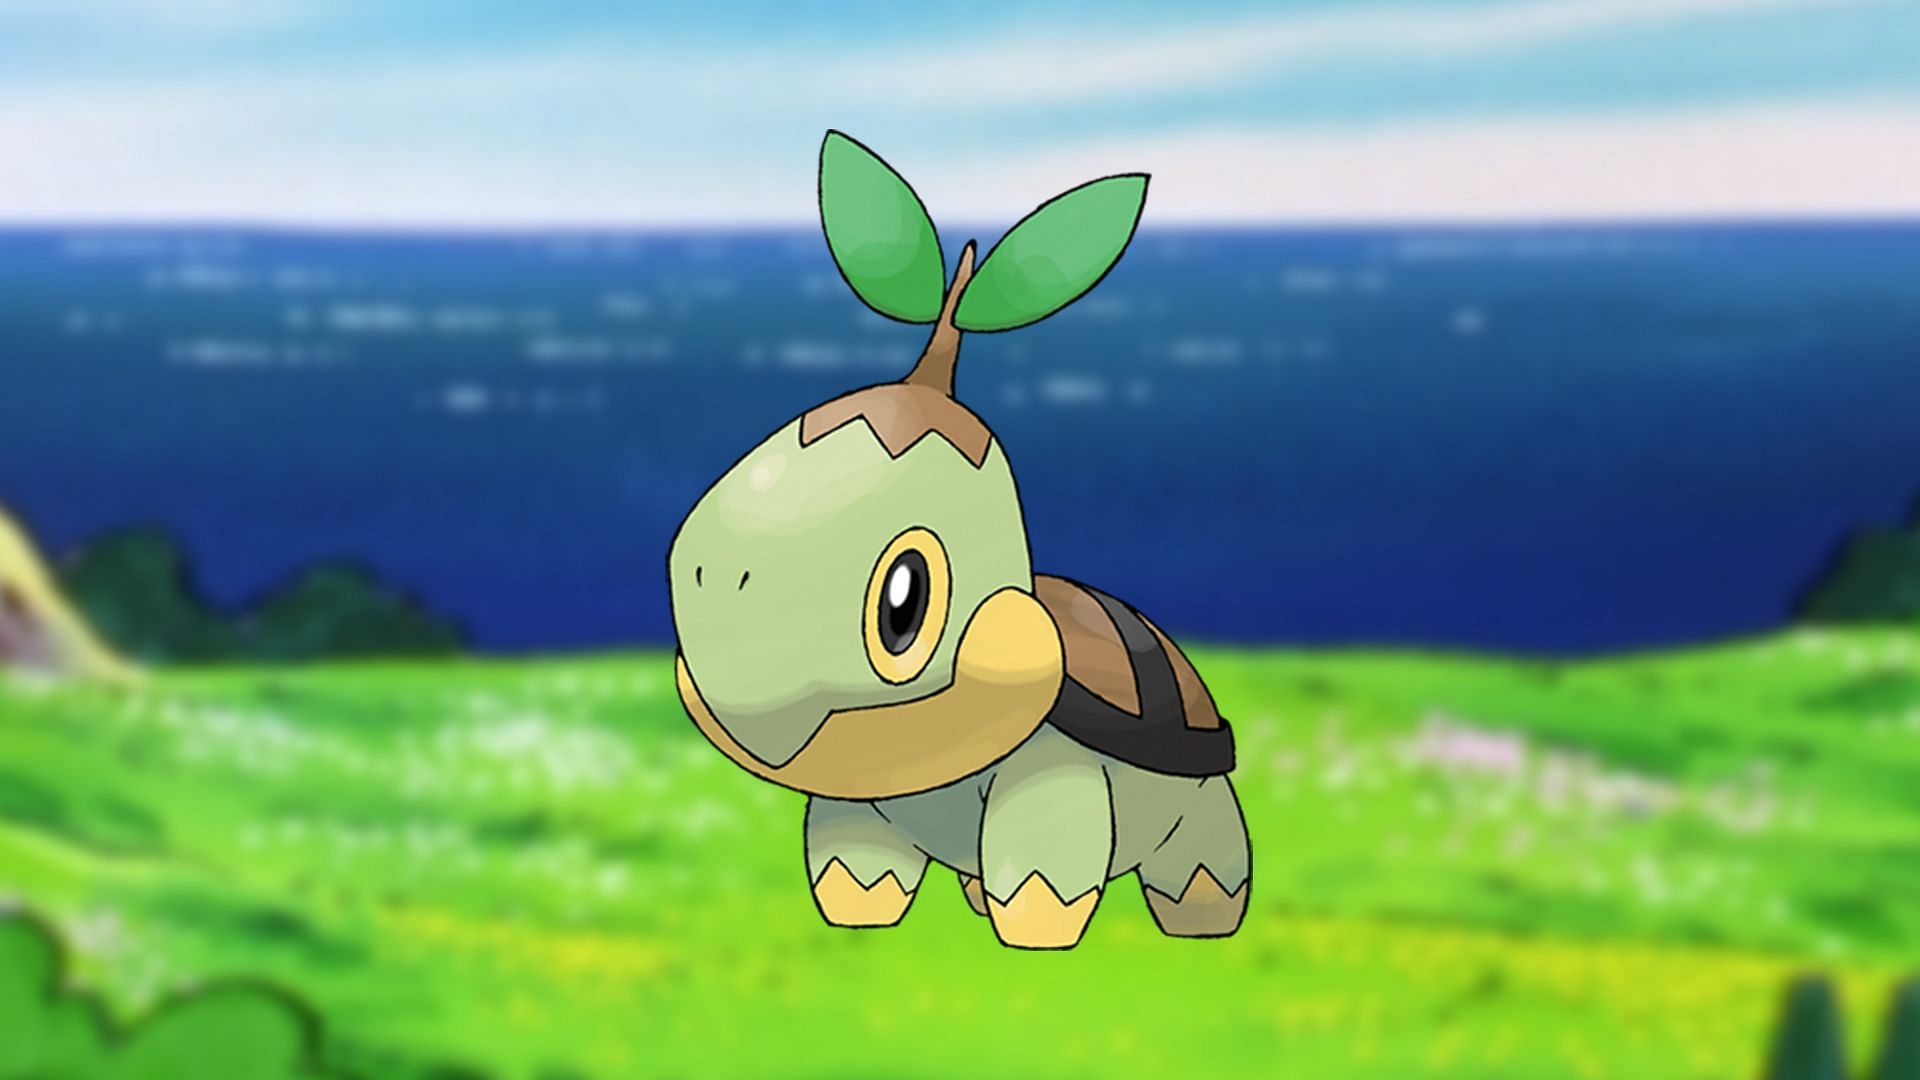 Turtwig as it appears in the anime (Image via The Pokemon Company)